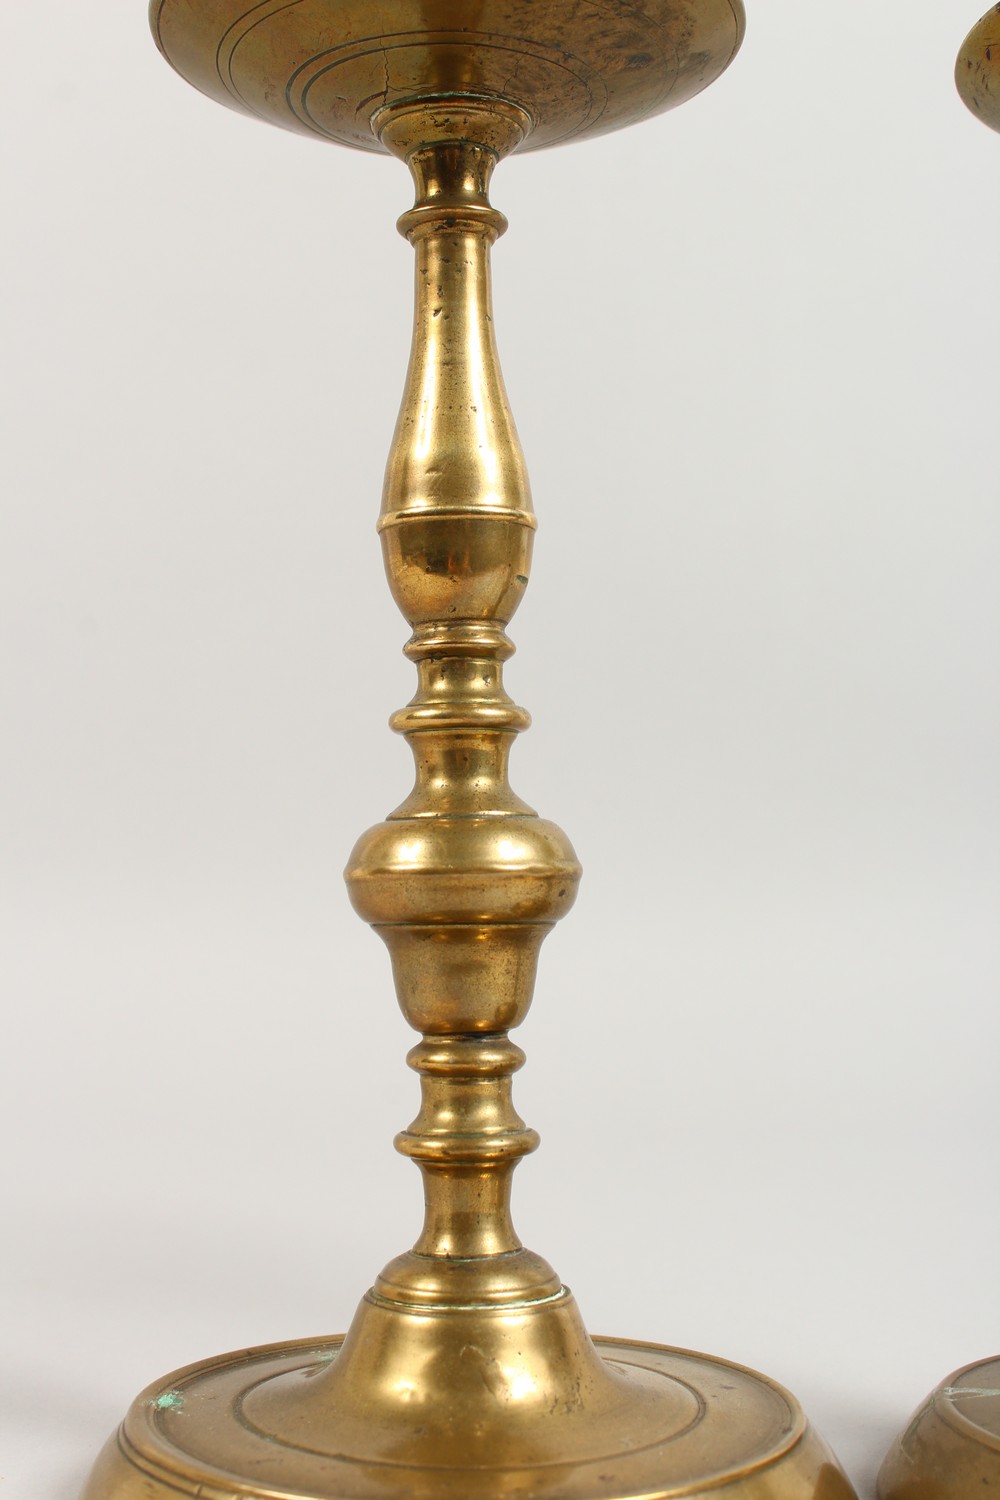 A PAIR OF EARLY BRASS CANDLESTICKS, with broad drip pans, on circular bases. 10ins high. - Image 2 of 4